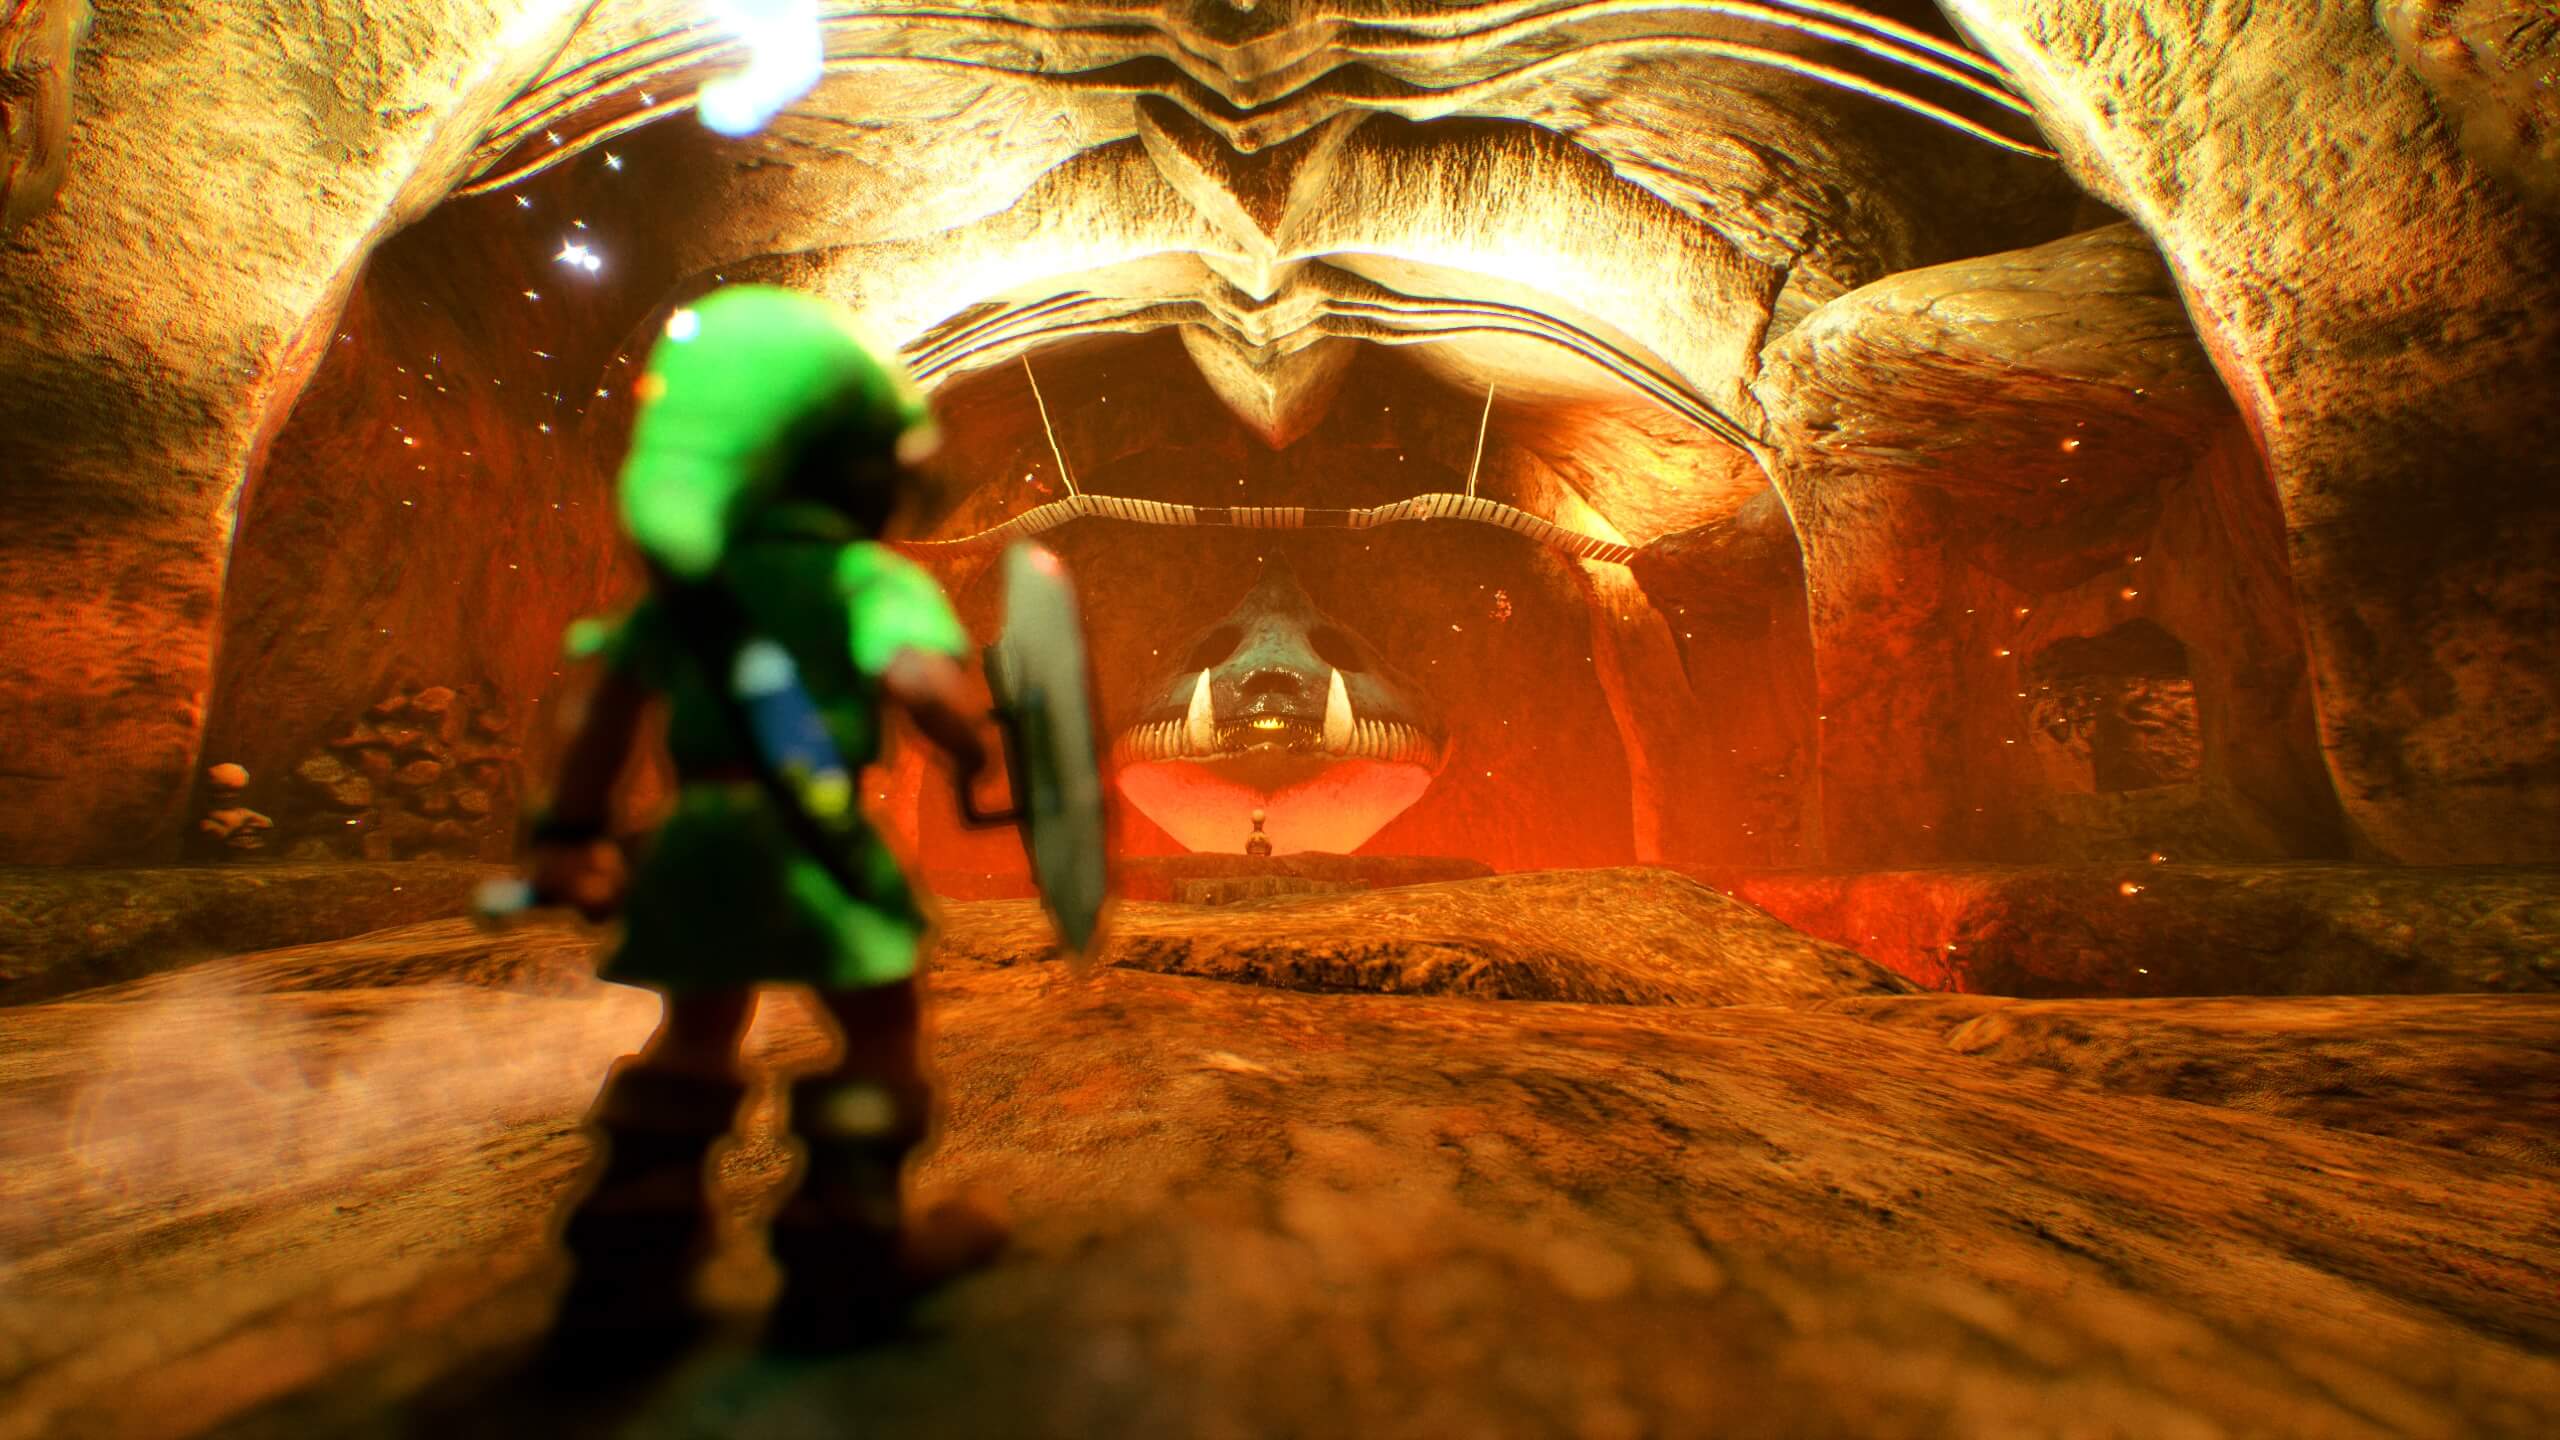 The Legend of Zelda: Ocarina Of Time Dodongo’s Cavern Remake in Unreal Engine 5.4 Available for Download